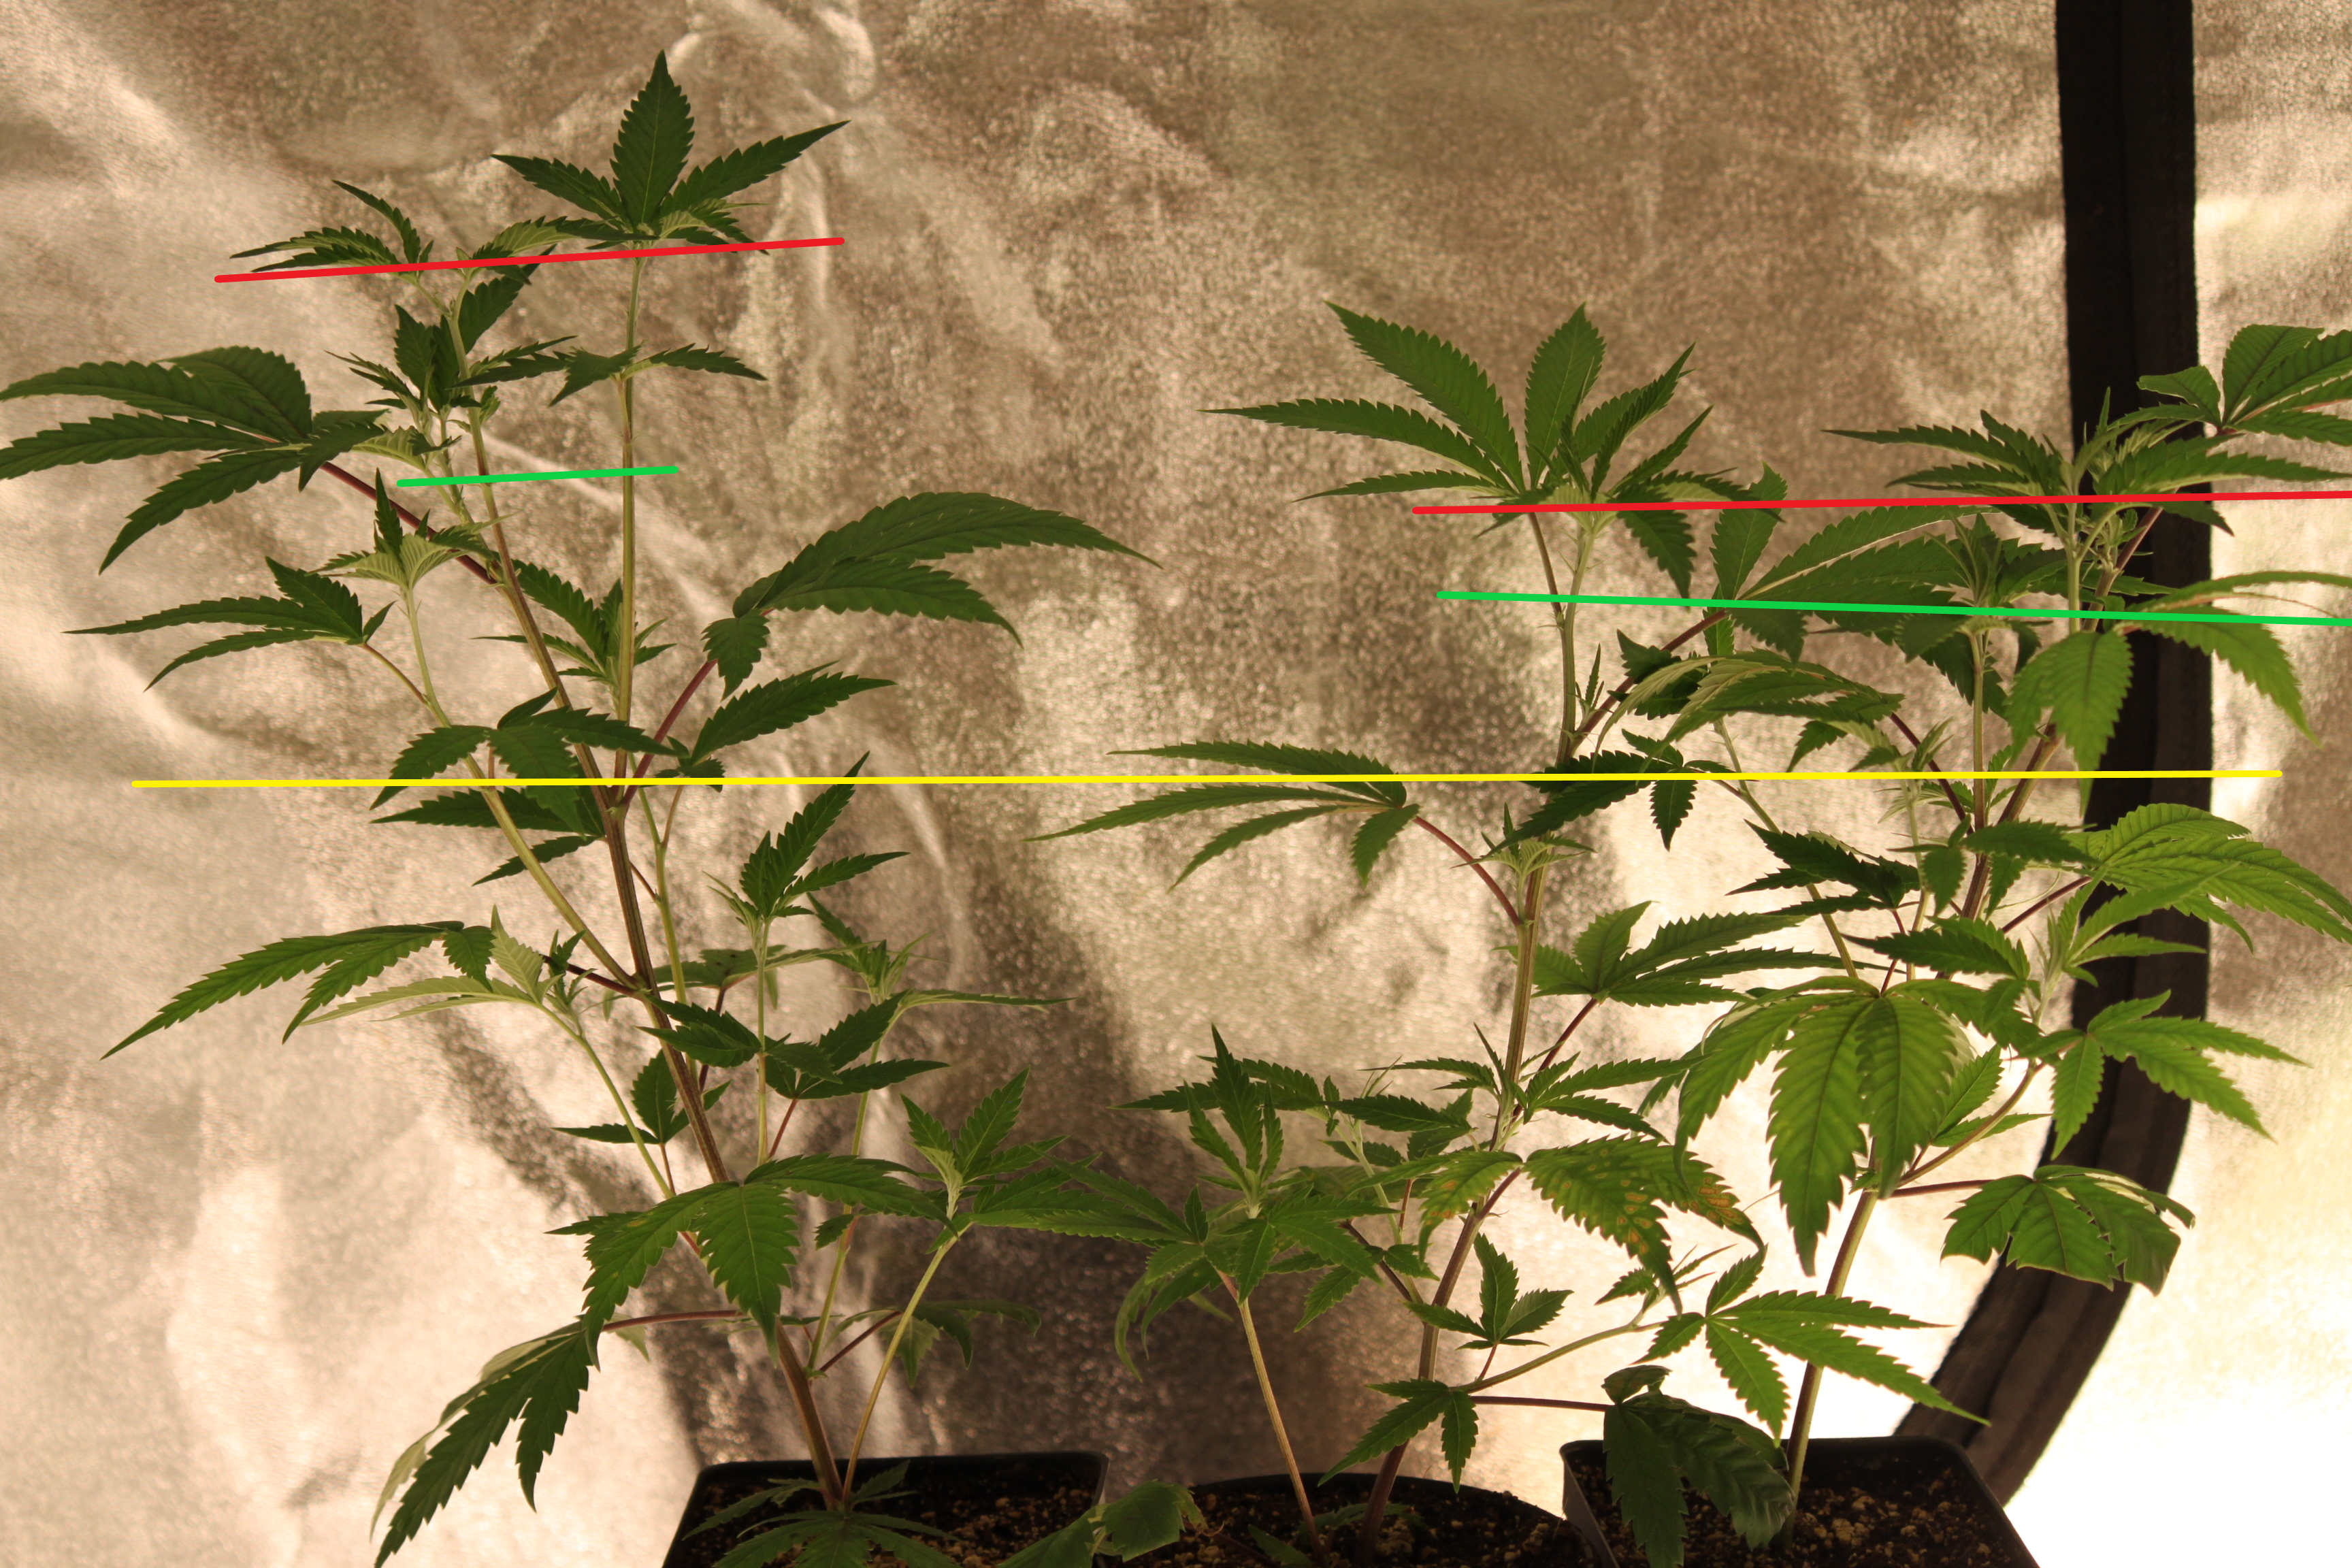 Advice on topping clones